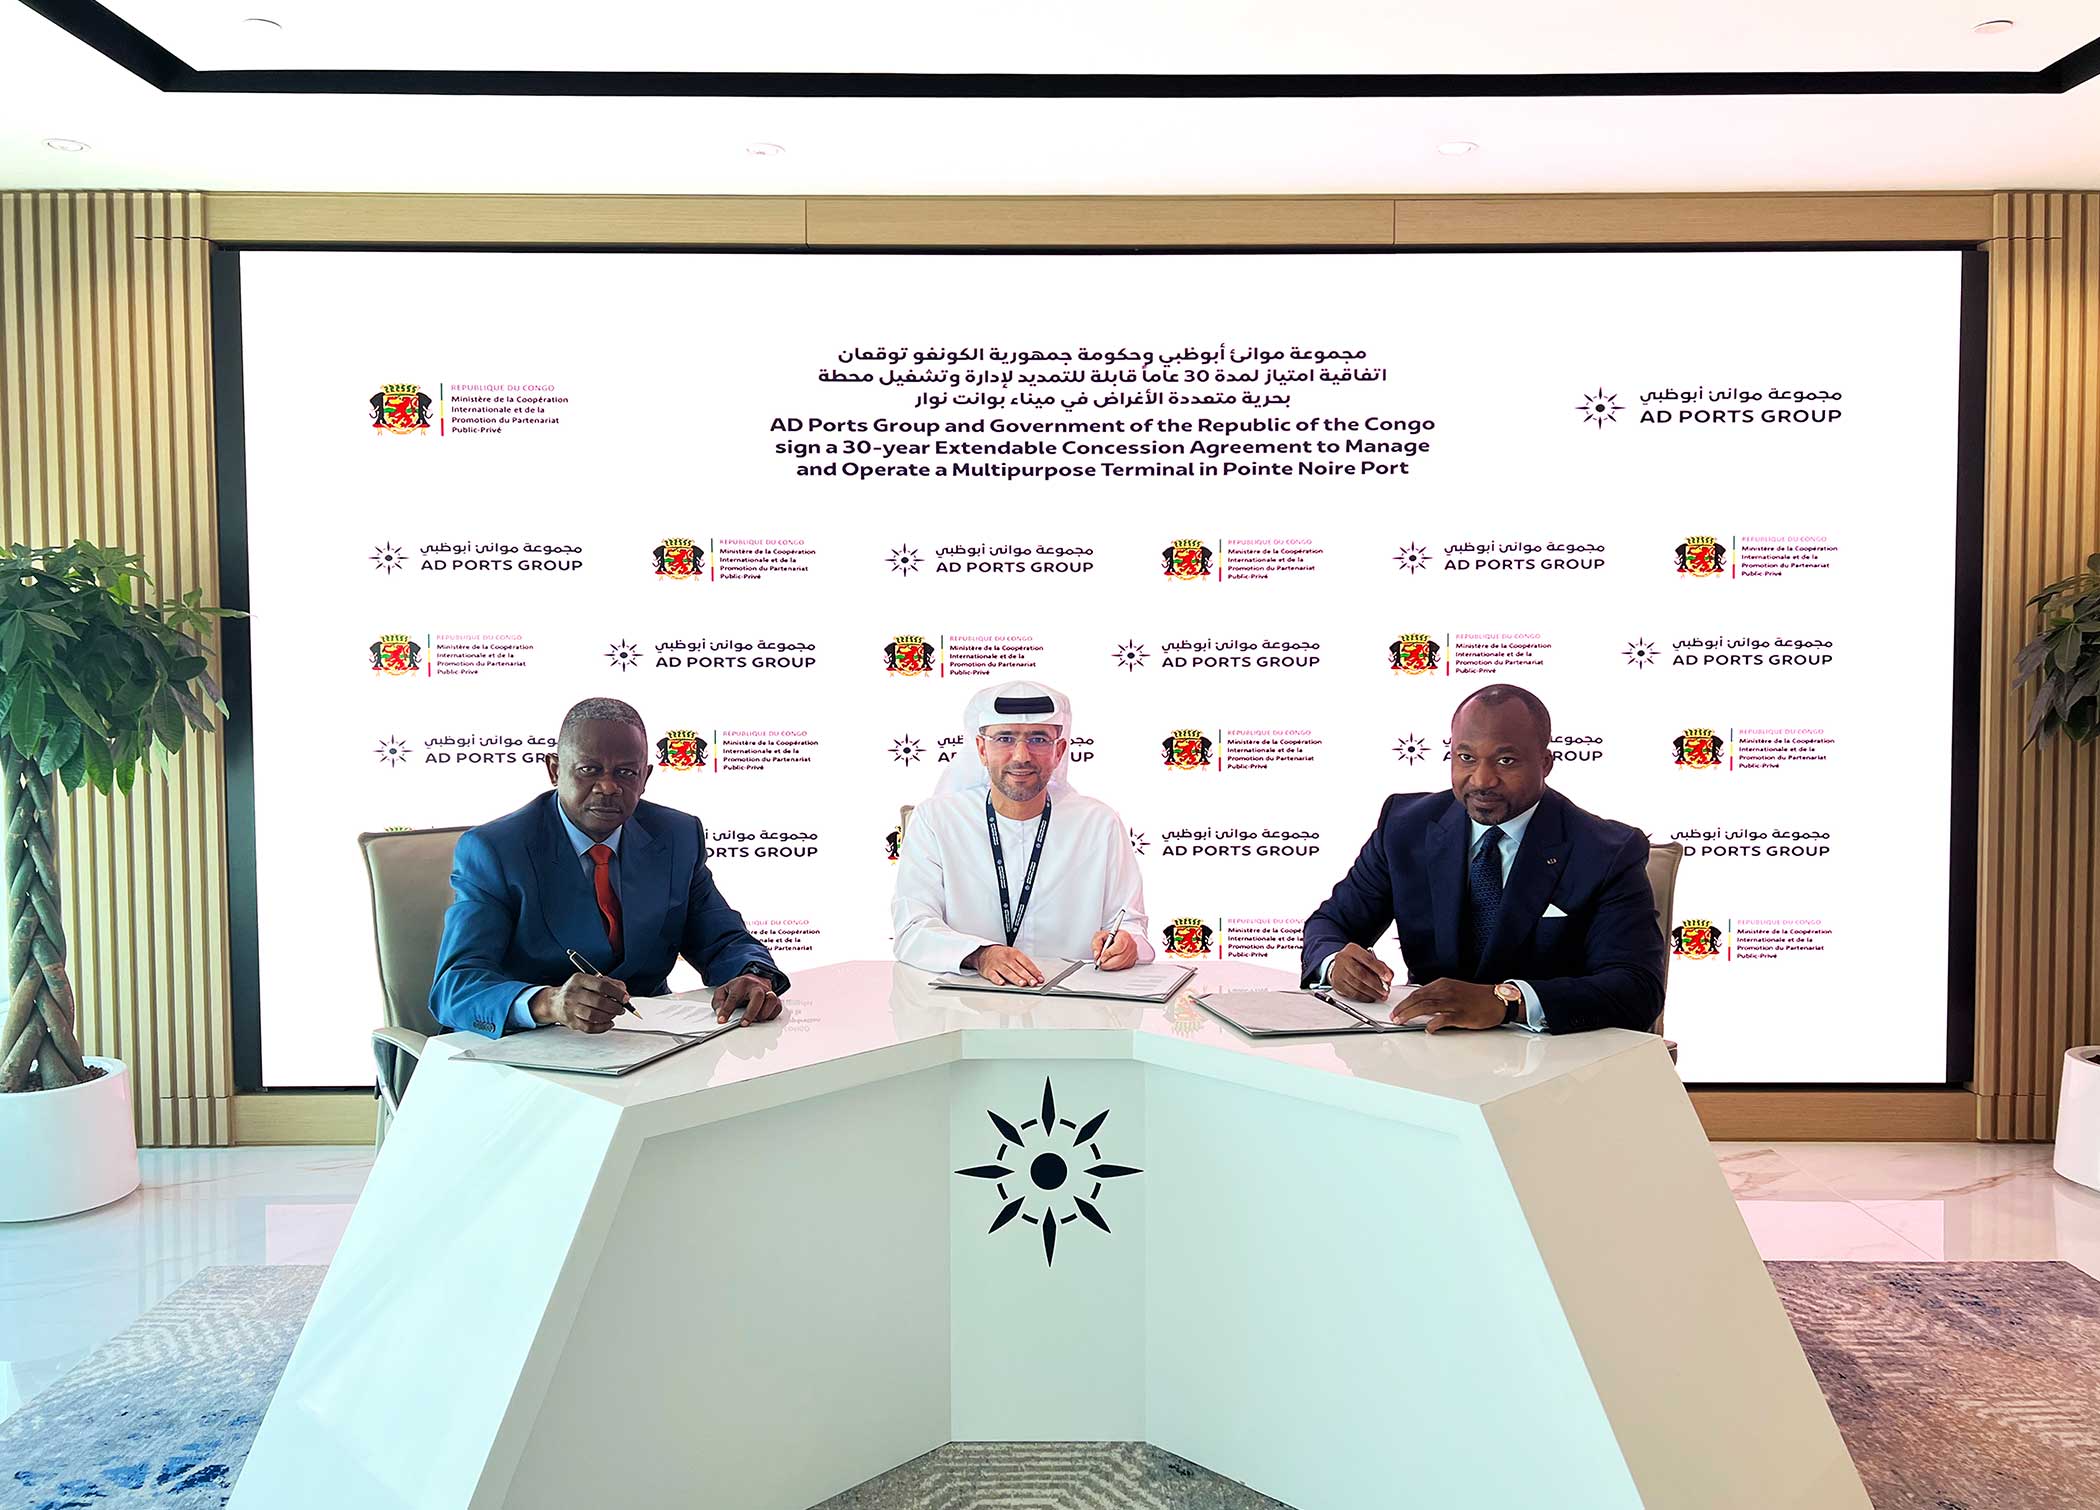 AD Ports Group signs a 30-year Extendable Concession Agreement to Manage and Operate a Multipurpose Terminal in Congo’s Pointe Noire Port